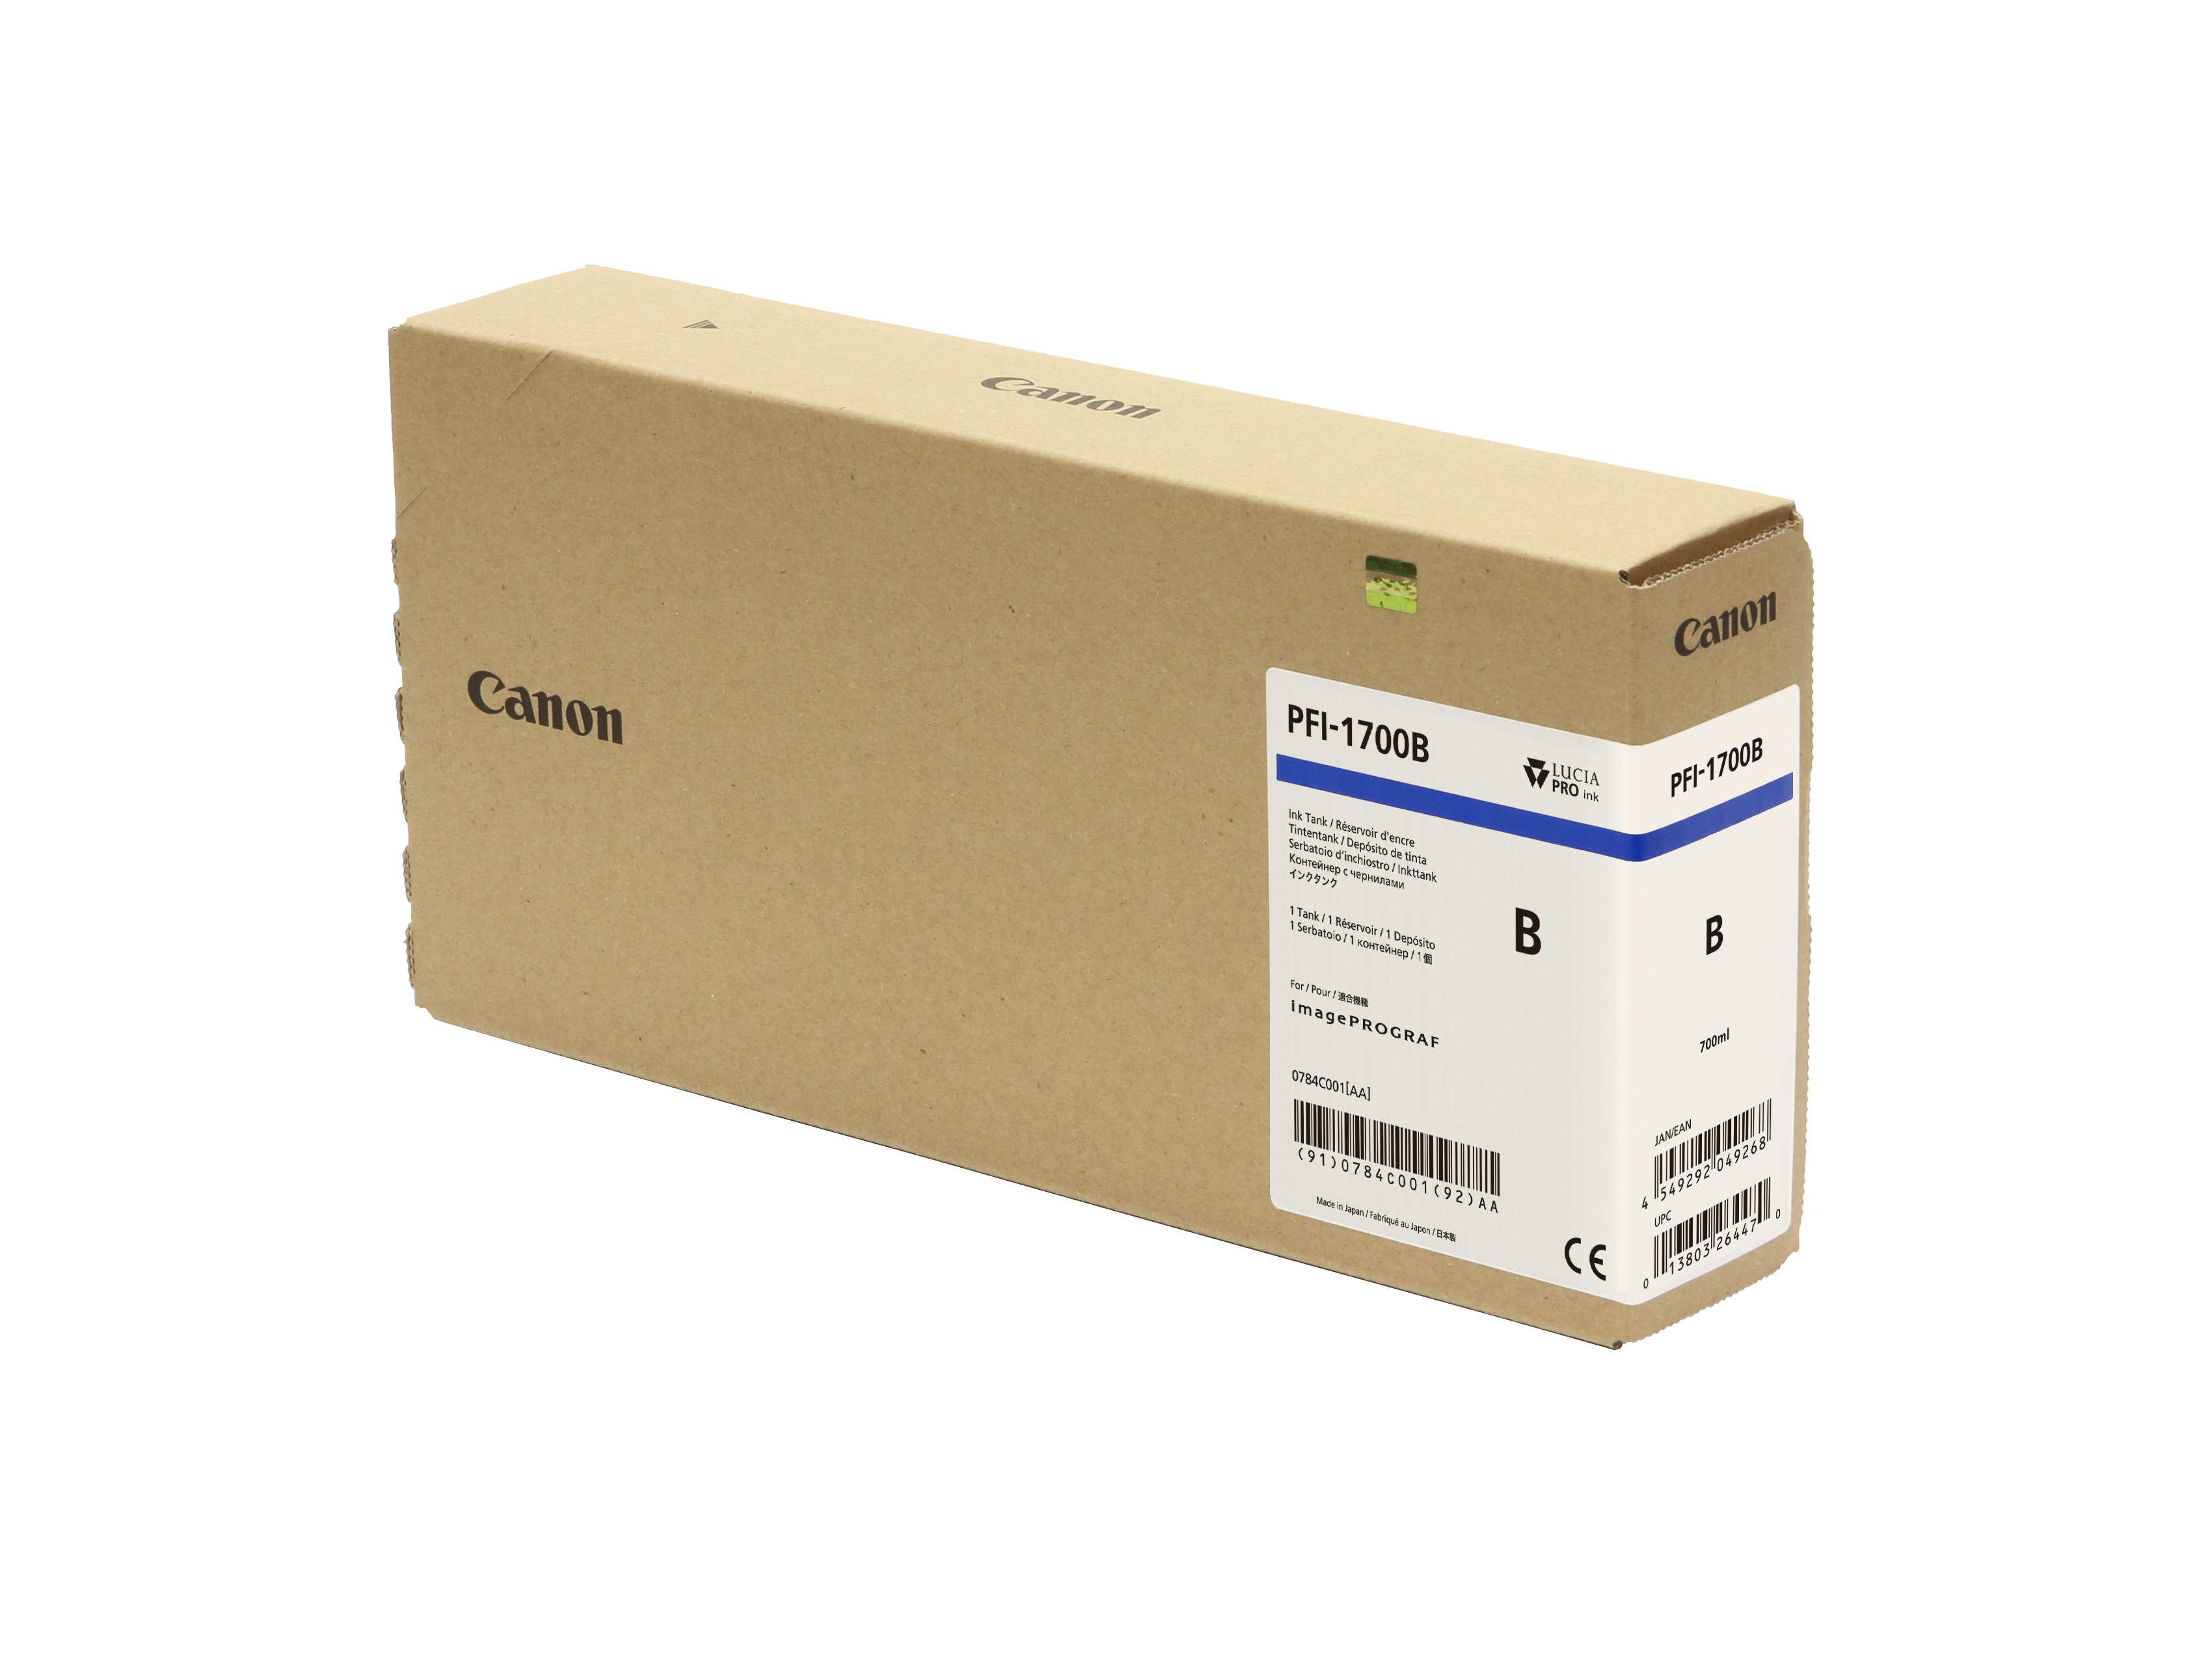 Canon PFI-1700B Blue Ink Tank - 700ml Cartridge - for Canon PRO-2000, PRO-4000 Printers - 0784C001AA - next day delivery from GDS Graphic Design Supplies Ltd